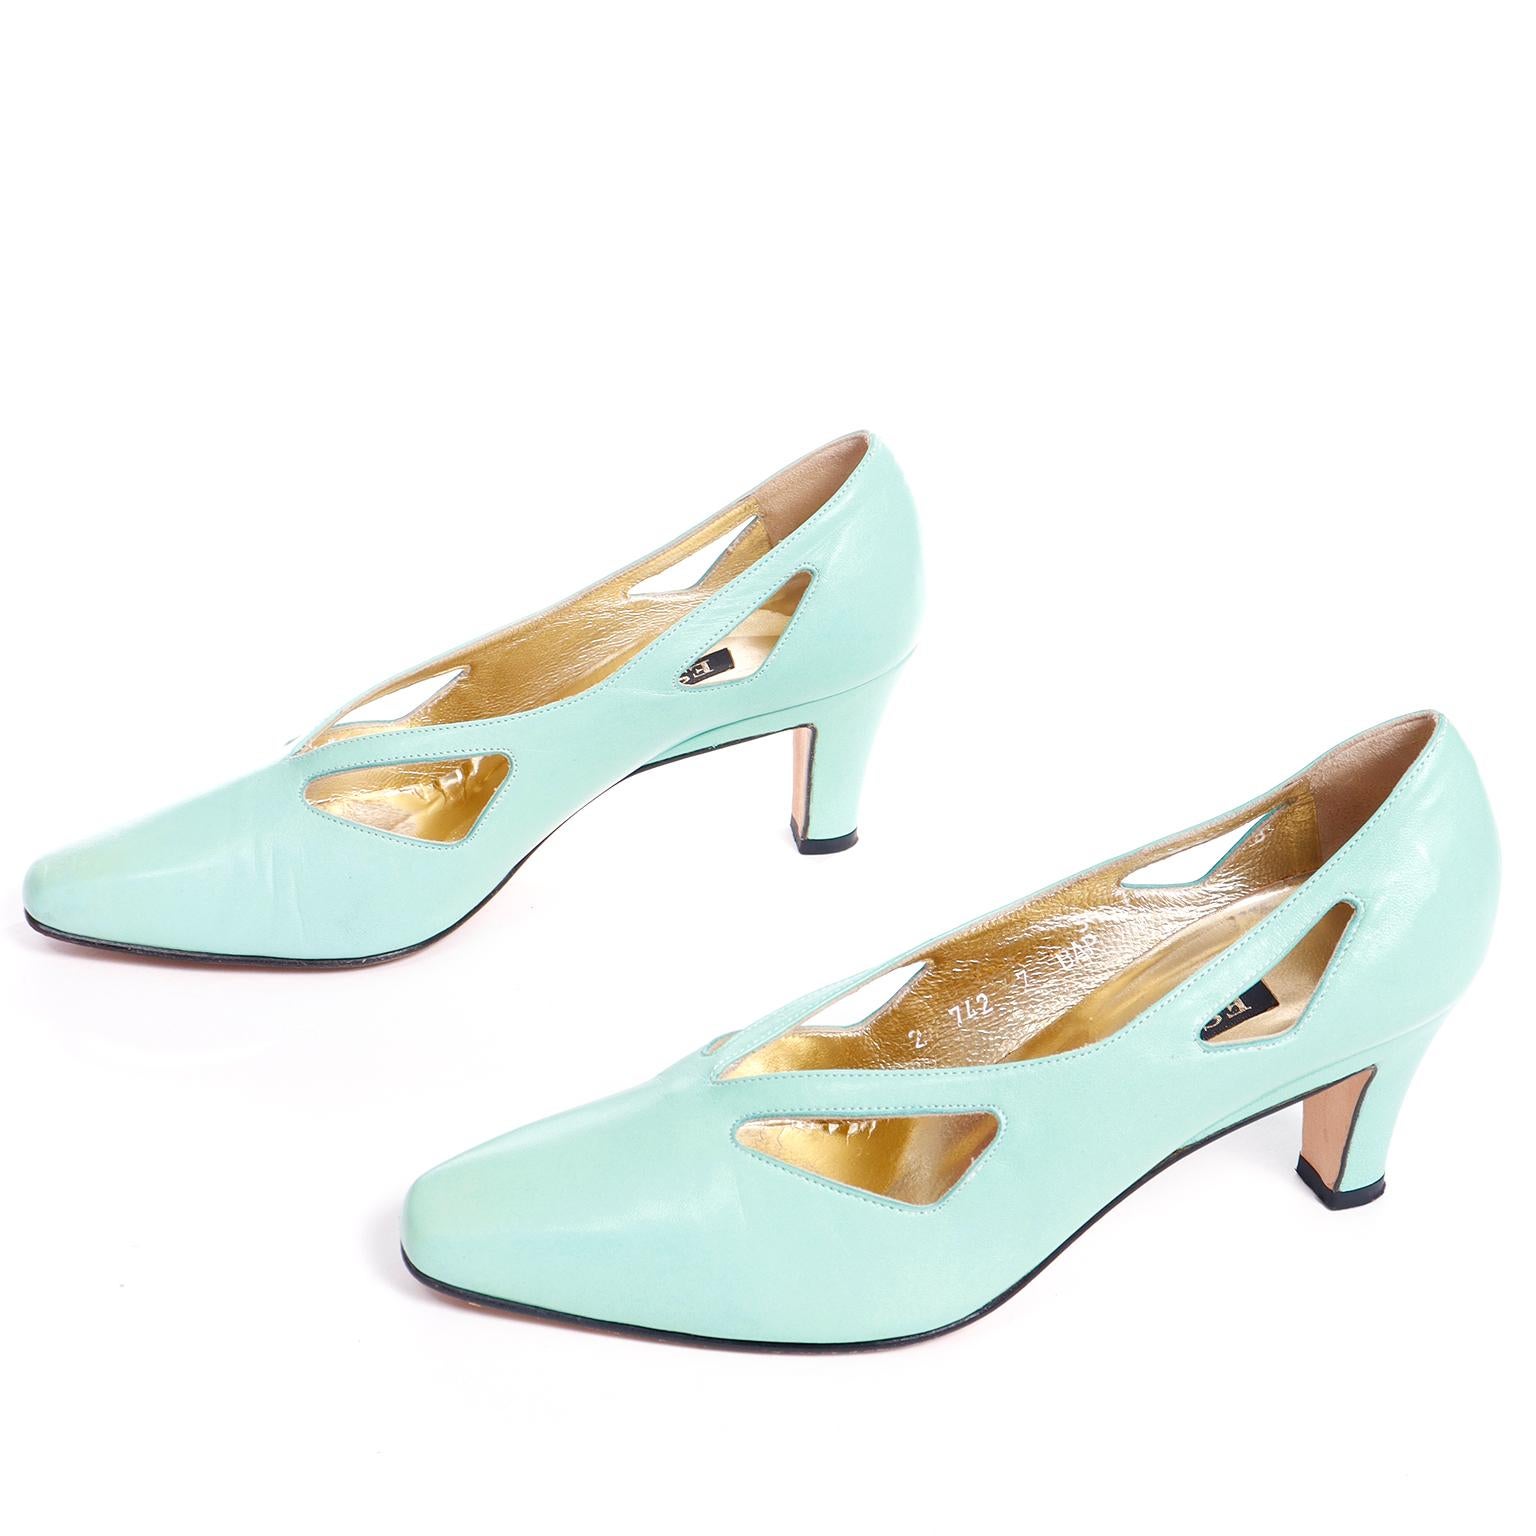 Mint Green Escada Margaretha Ley 1980s Vintage Leather Shoes W Cutout Details 7B In Excellent Condition For Sale In Portland, OR